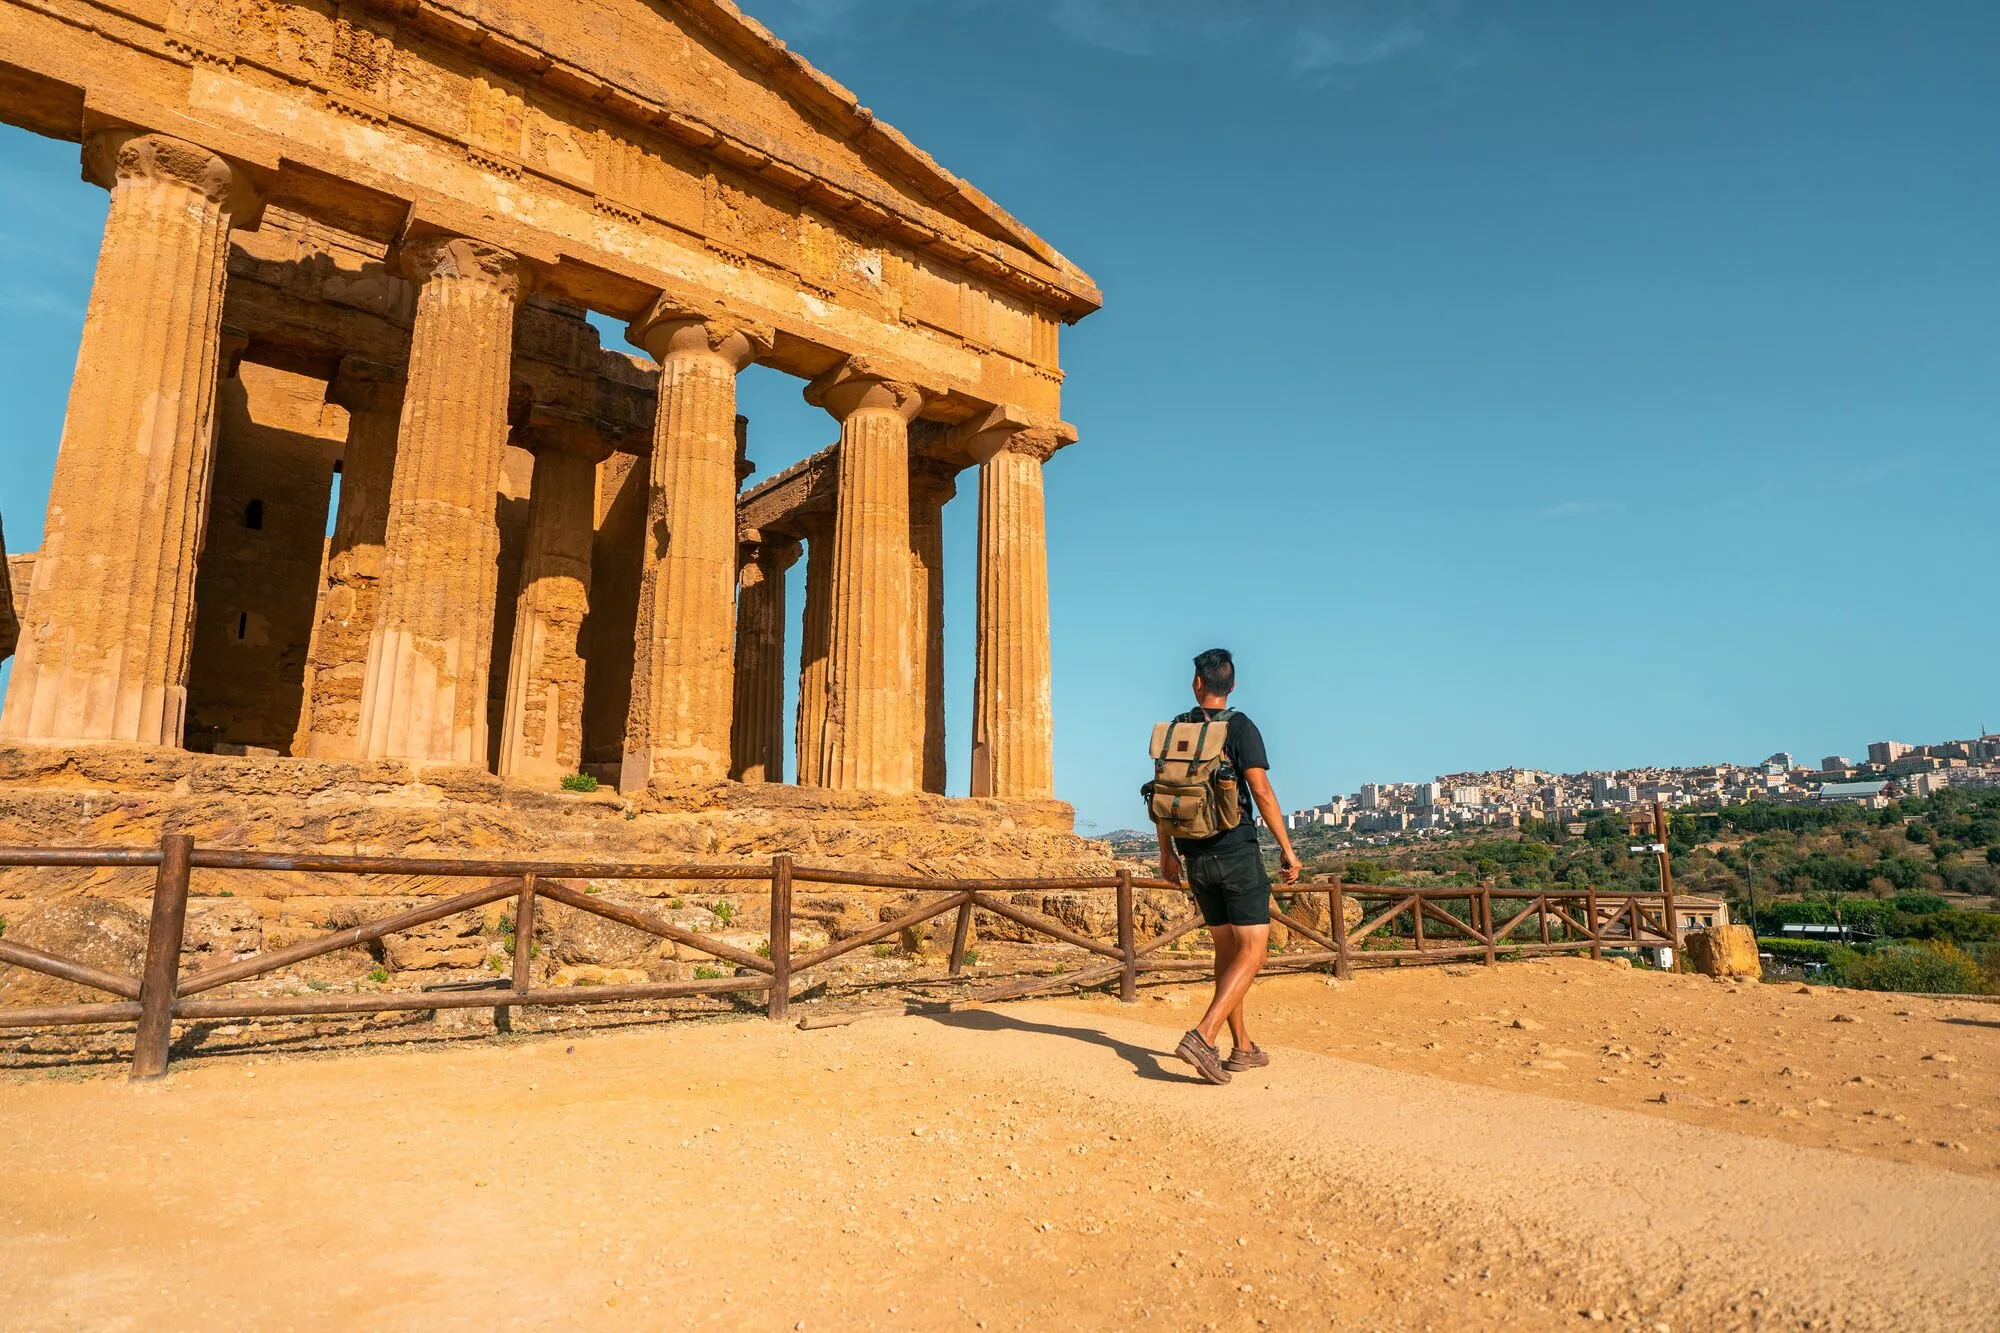 8 Awesome Things to Do in Agrigento for First-Timers - A Complete Guide to Backpacking Agrigento